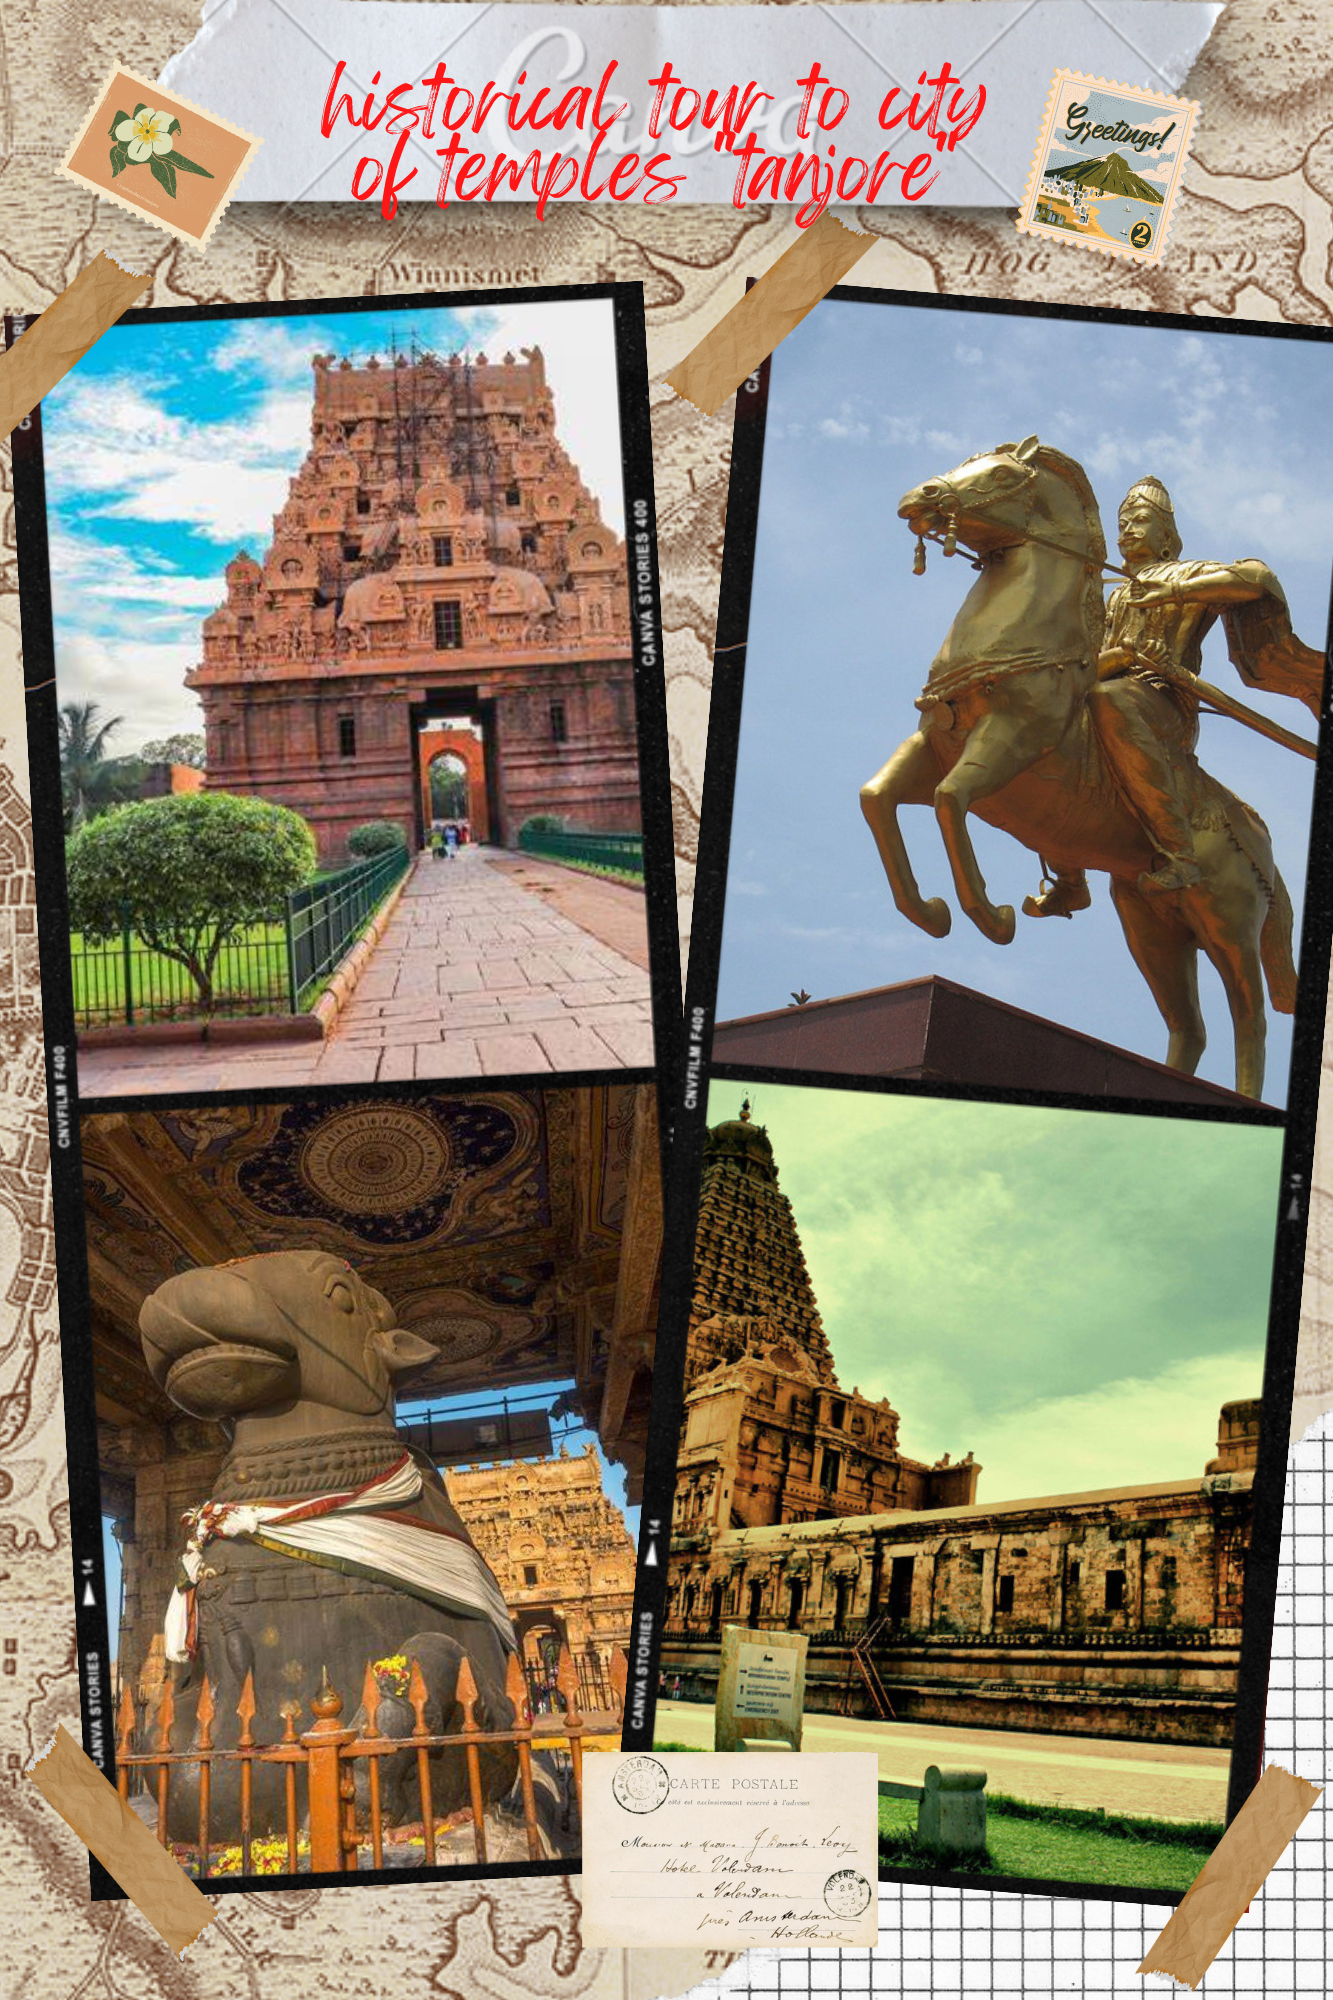 HISTORICAL TOUR TO CITY OF TEMPLES "TANJORE''